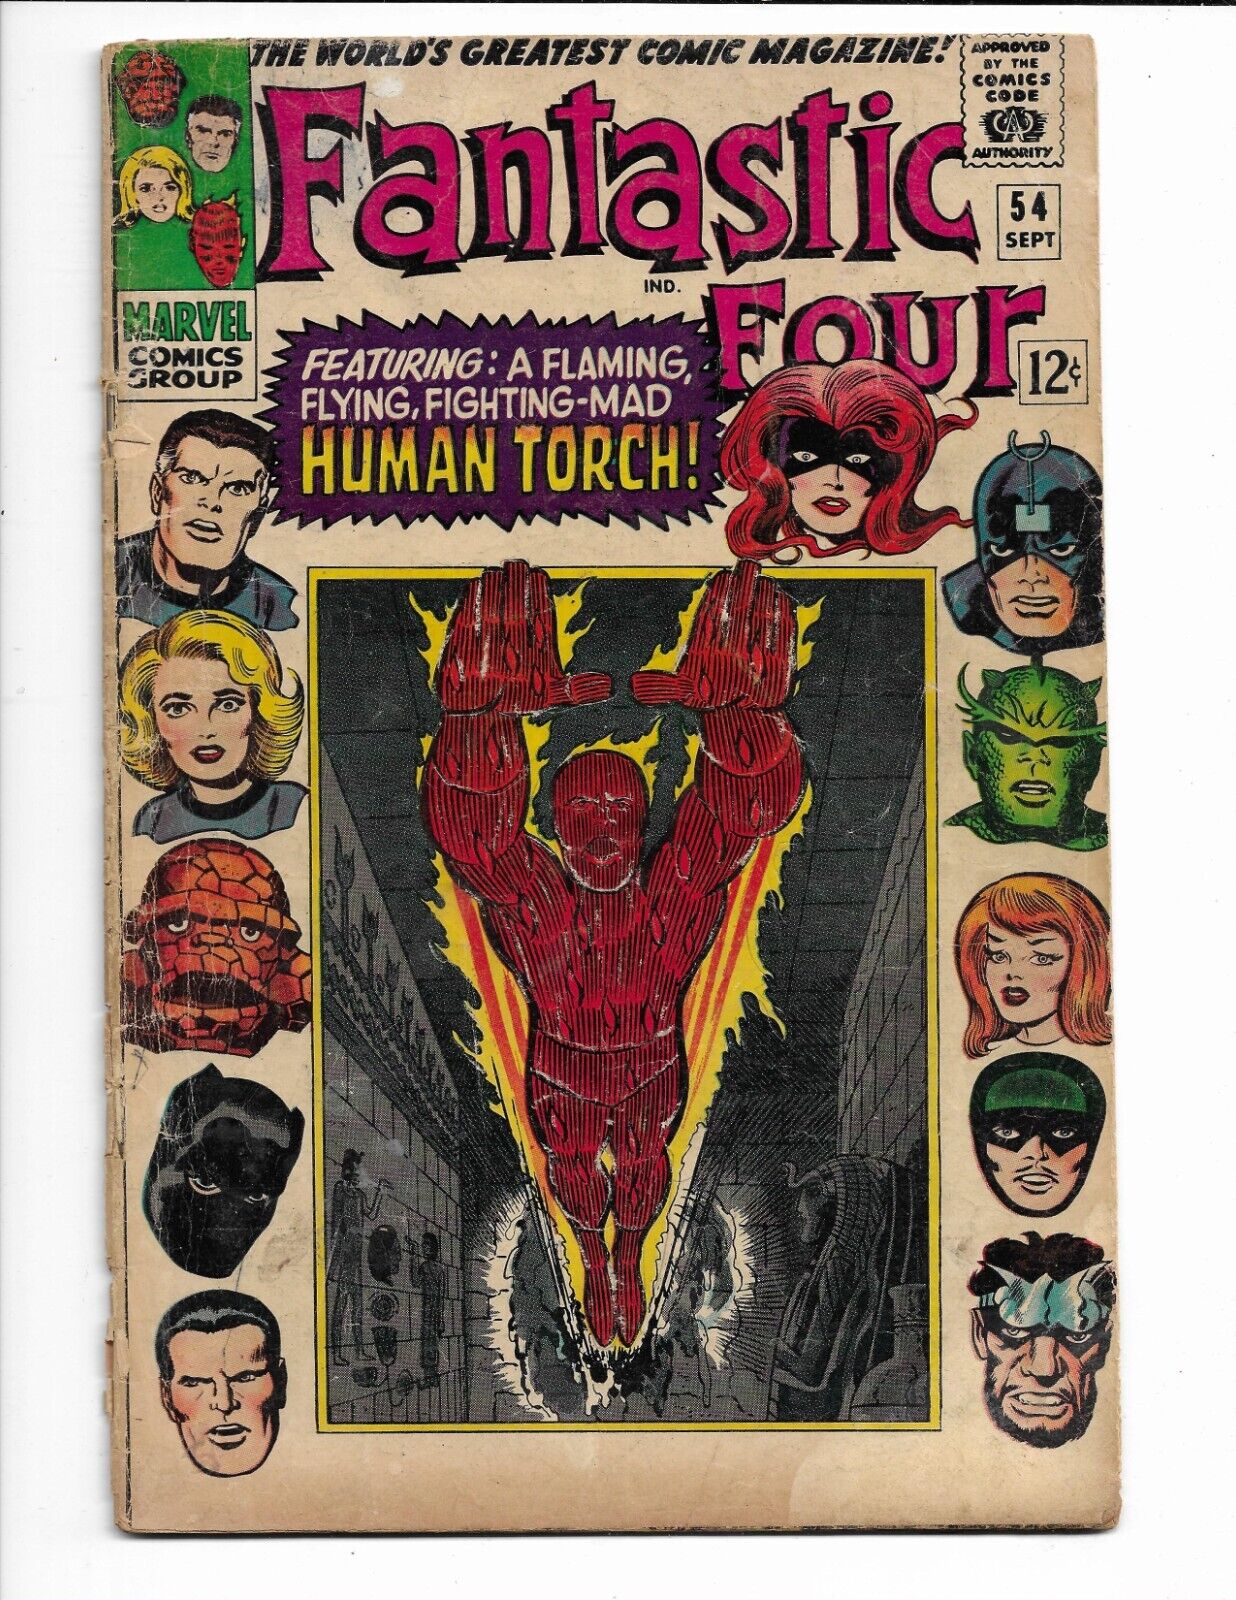 FANTASTIC FOUR 54 - G+ 2.5 - 3RD APPEARANCE OF BLACK PANTHER - INHUMANS (1966)